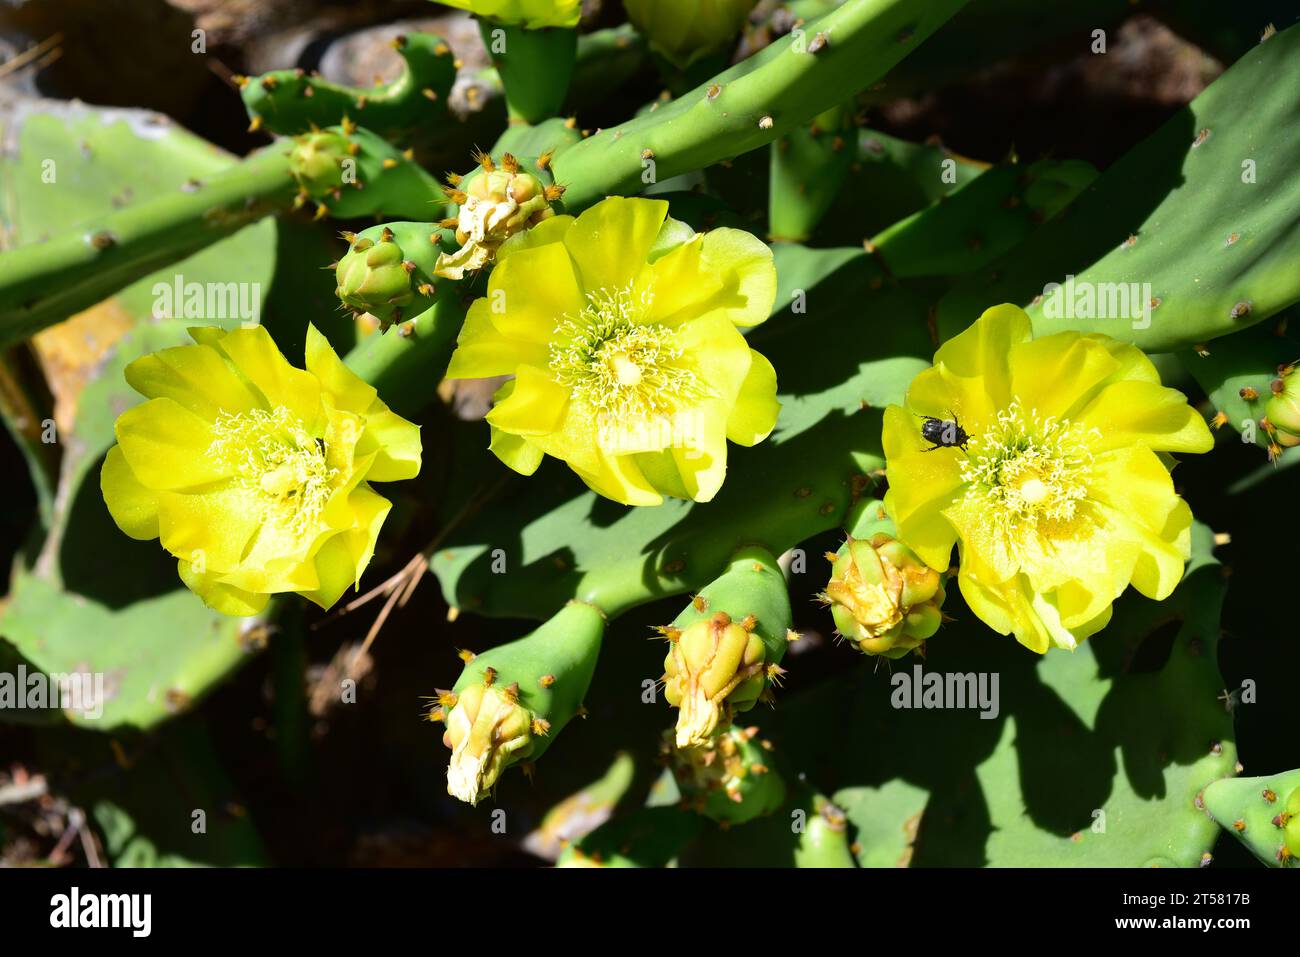 Tuna india (Opuntia dillenii) is a cactus native to Mexico, Central America and Caribe and naturalized in temperate regions of Europe. This photo was Stock Photo